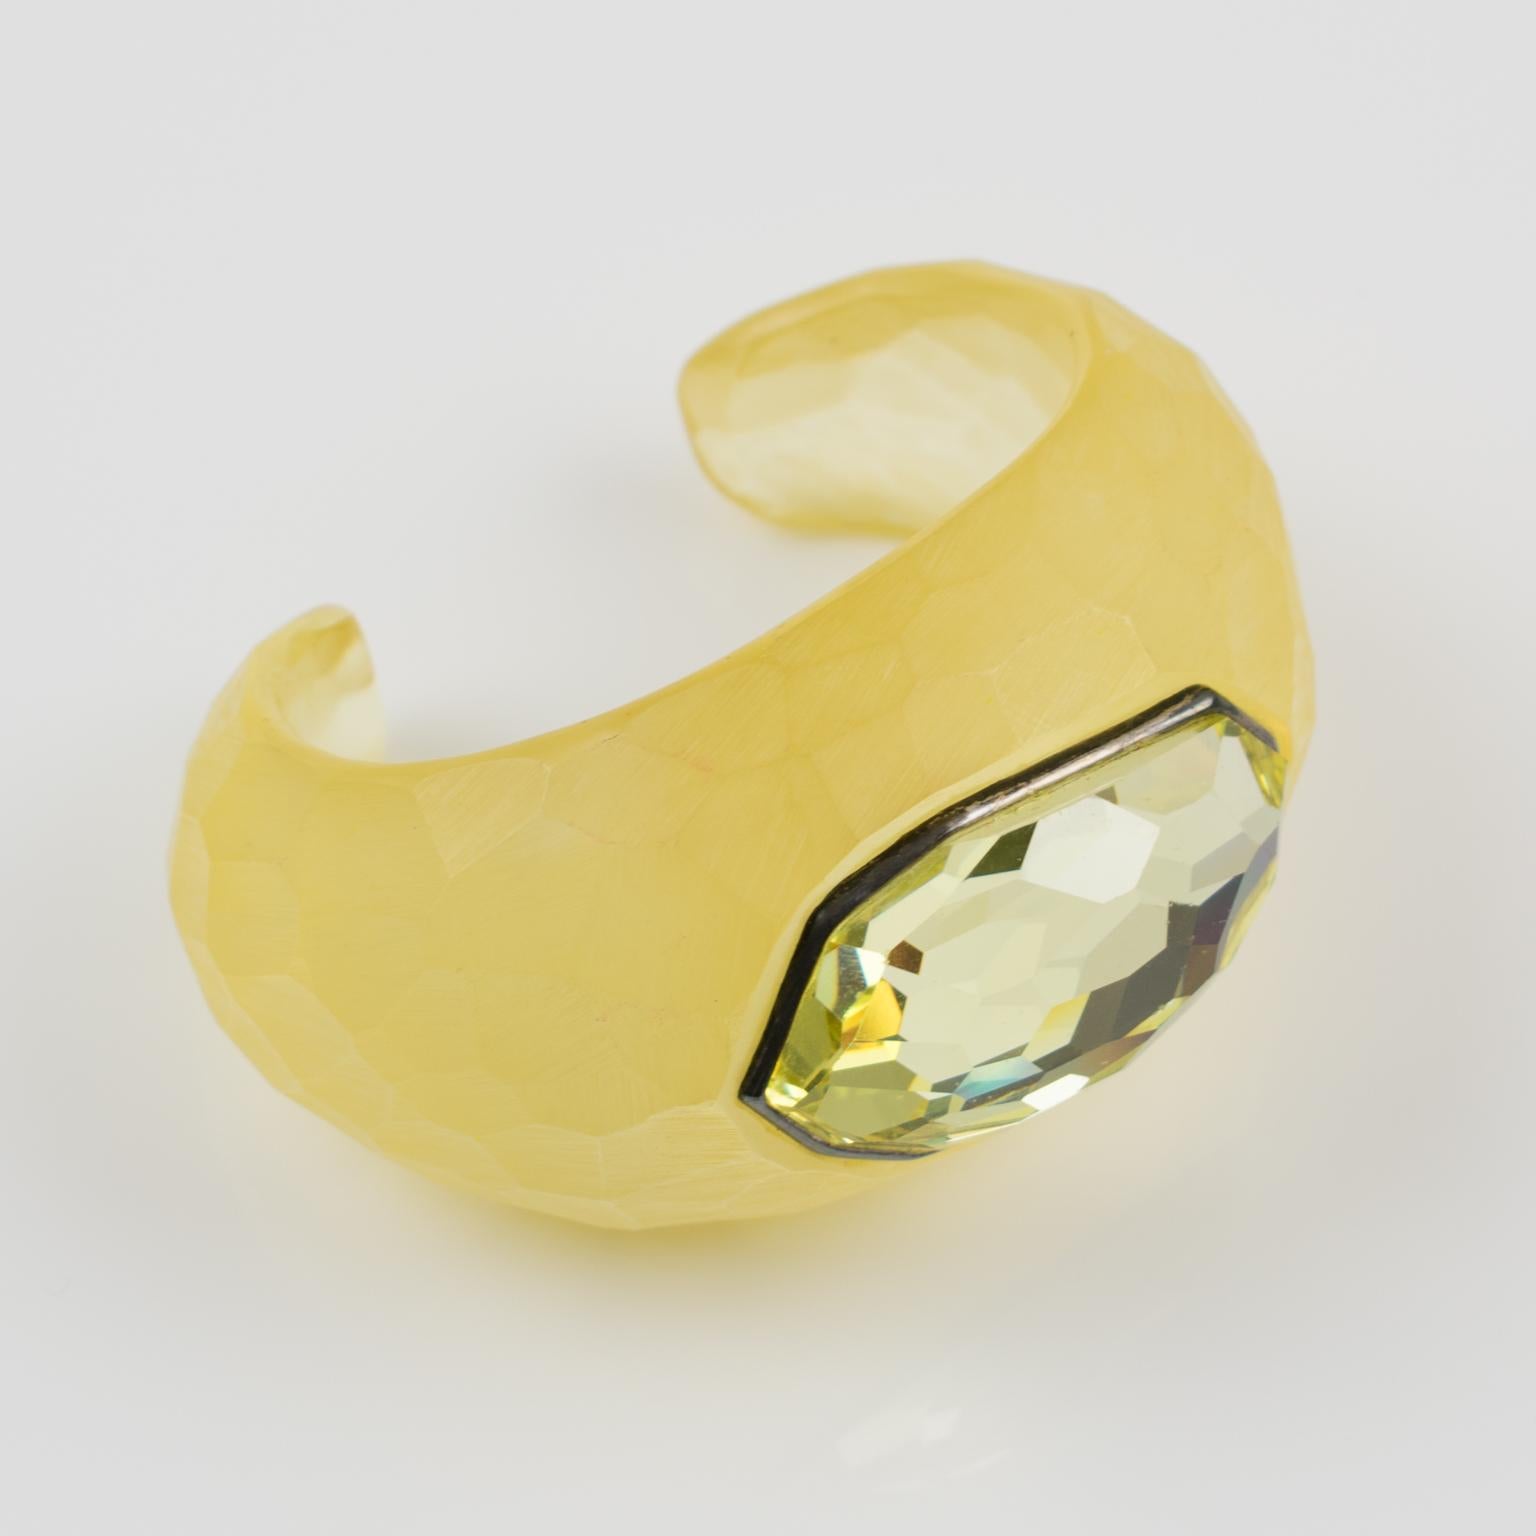 Gorgeous Daniel Swarovski Paris crystal-cut rhinestone on a Lucite cuff bracelet. This Lucite bracelet was designed by French artist Aline Gui for Swarovski and features a bold yellow champagne color Lucite cuff shape with faceted carving and